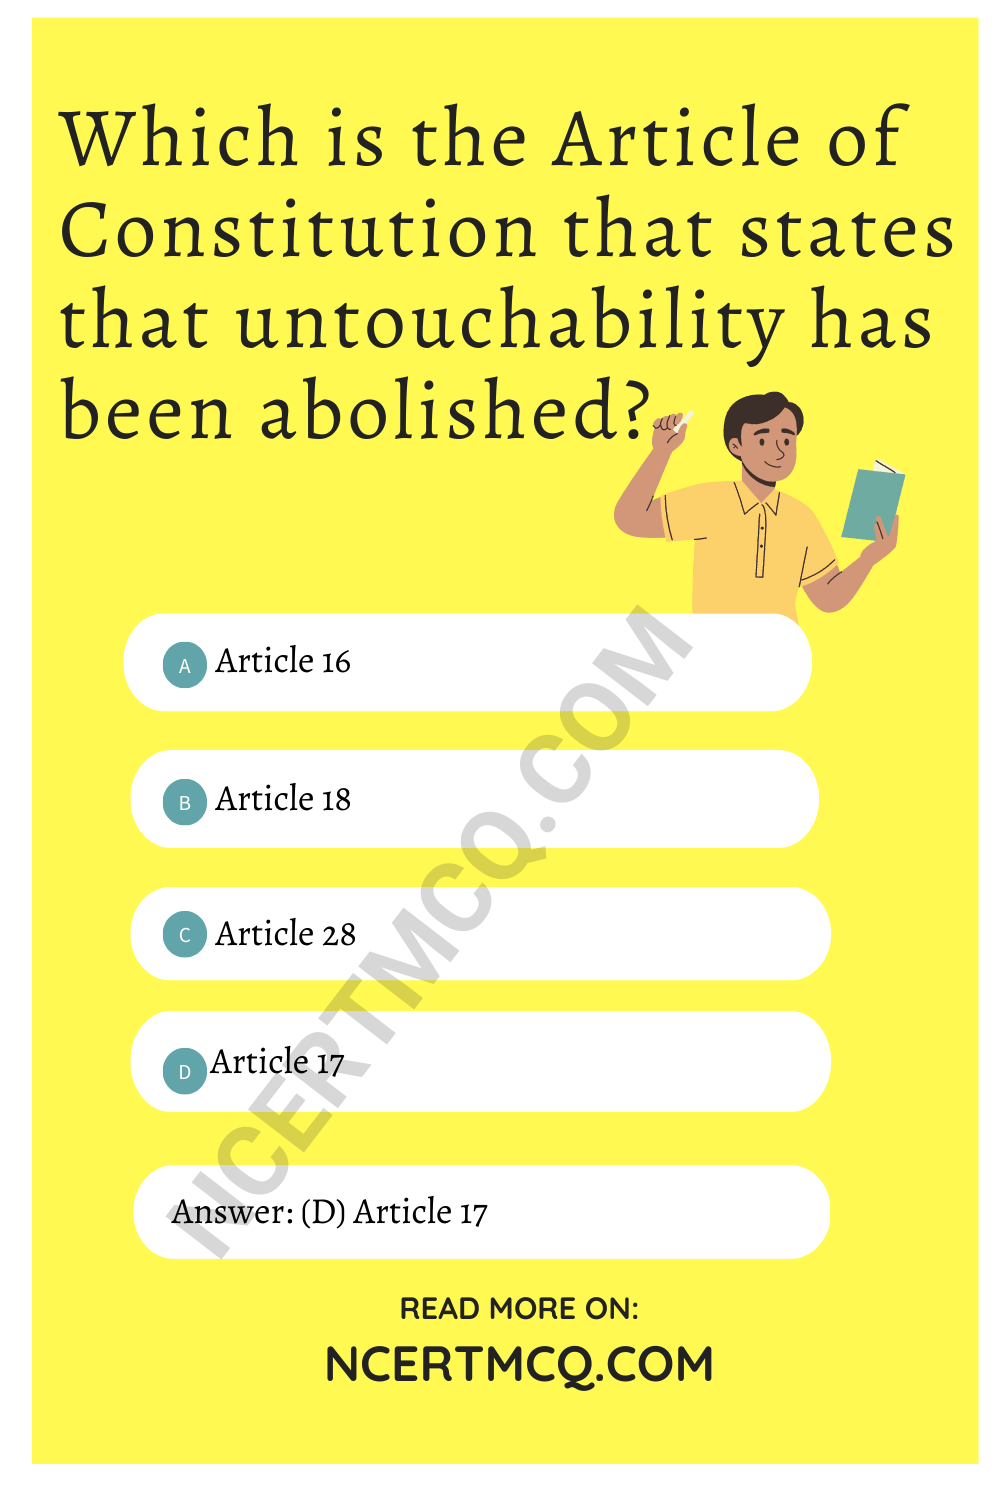 Which is the Article of Constitution that states that untouchability has been abolished?